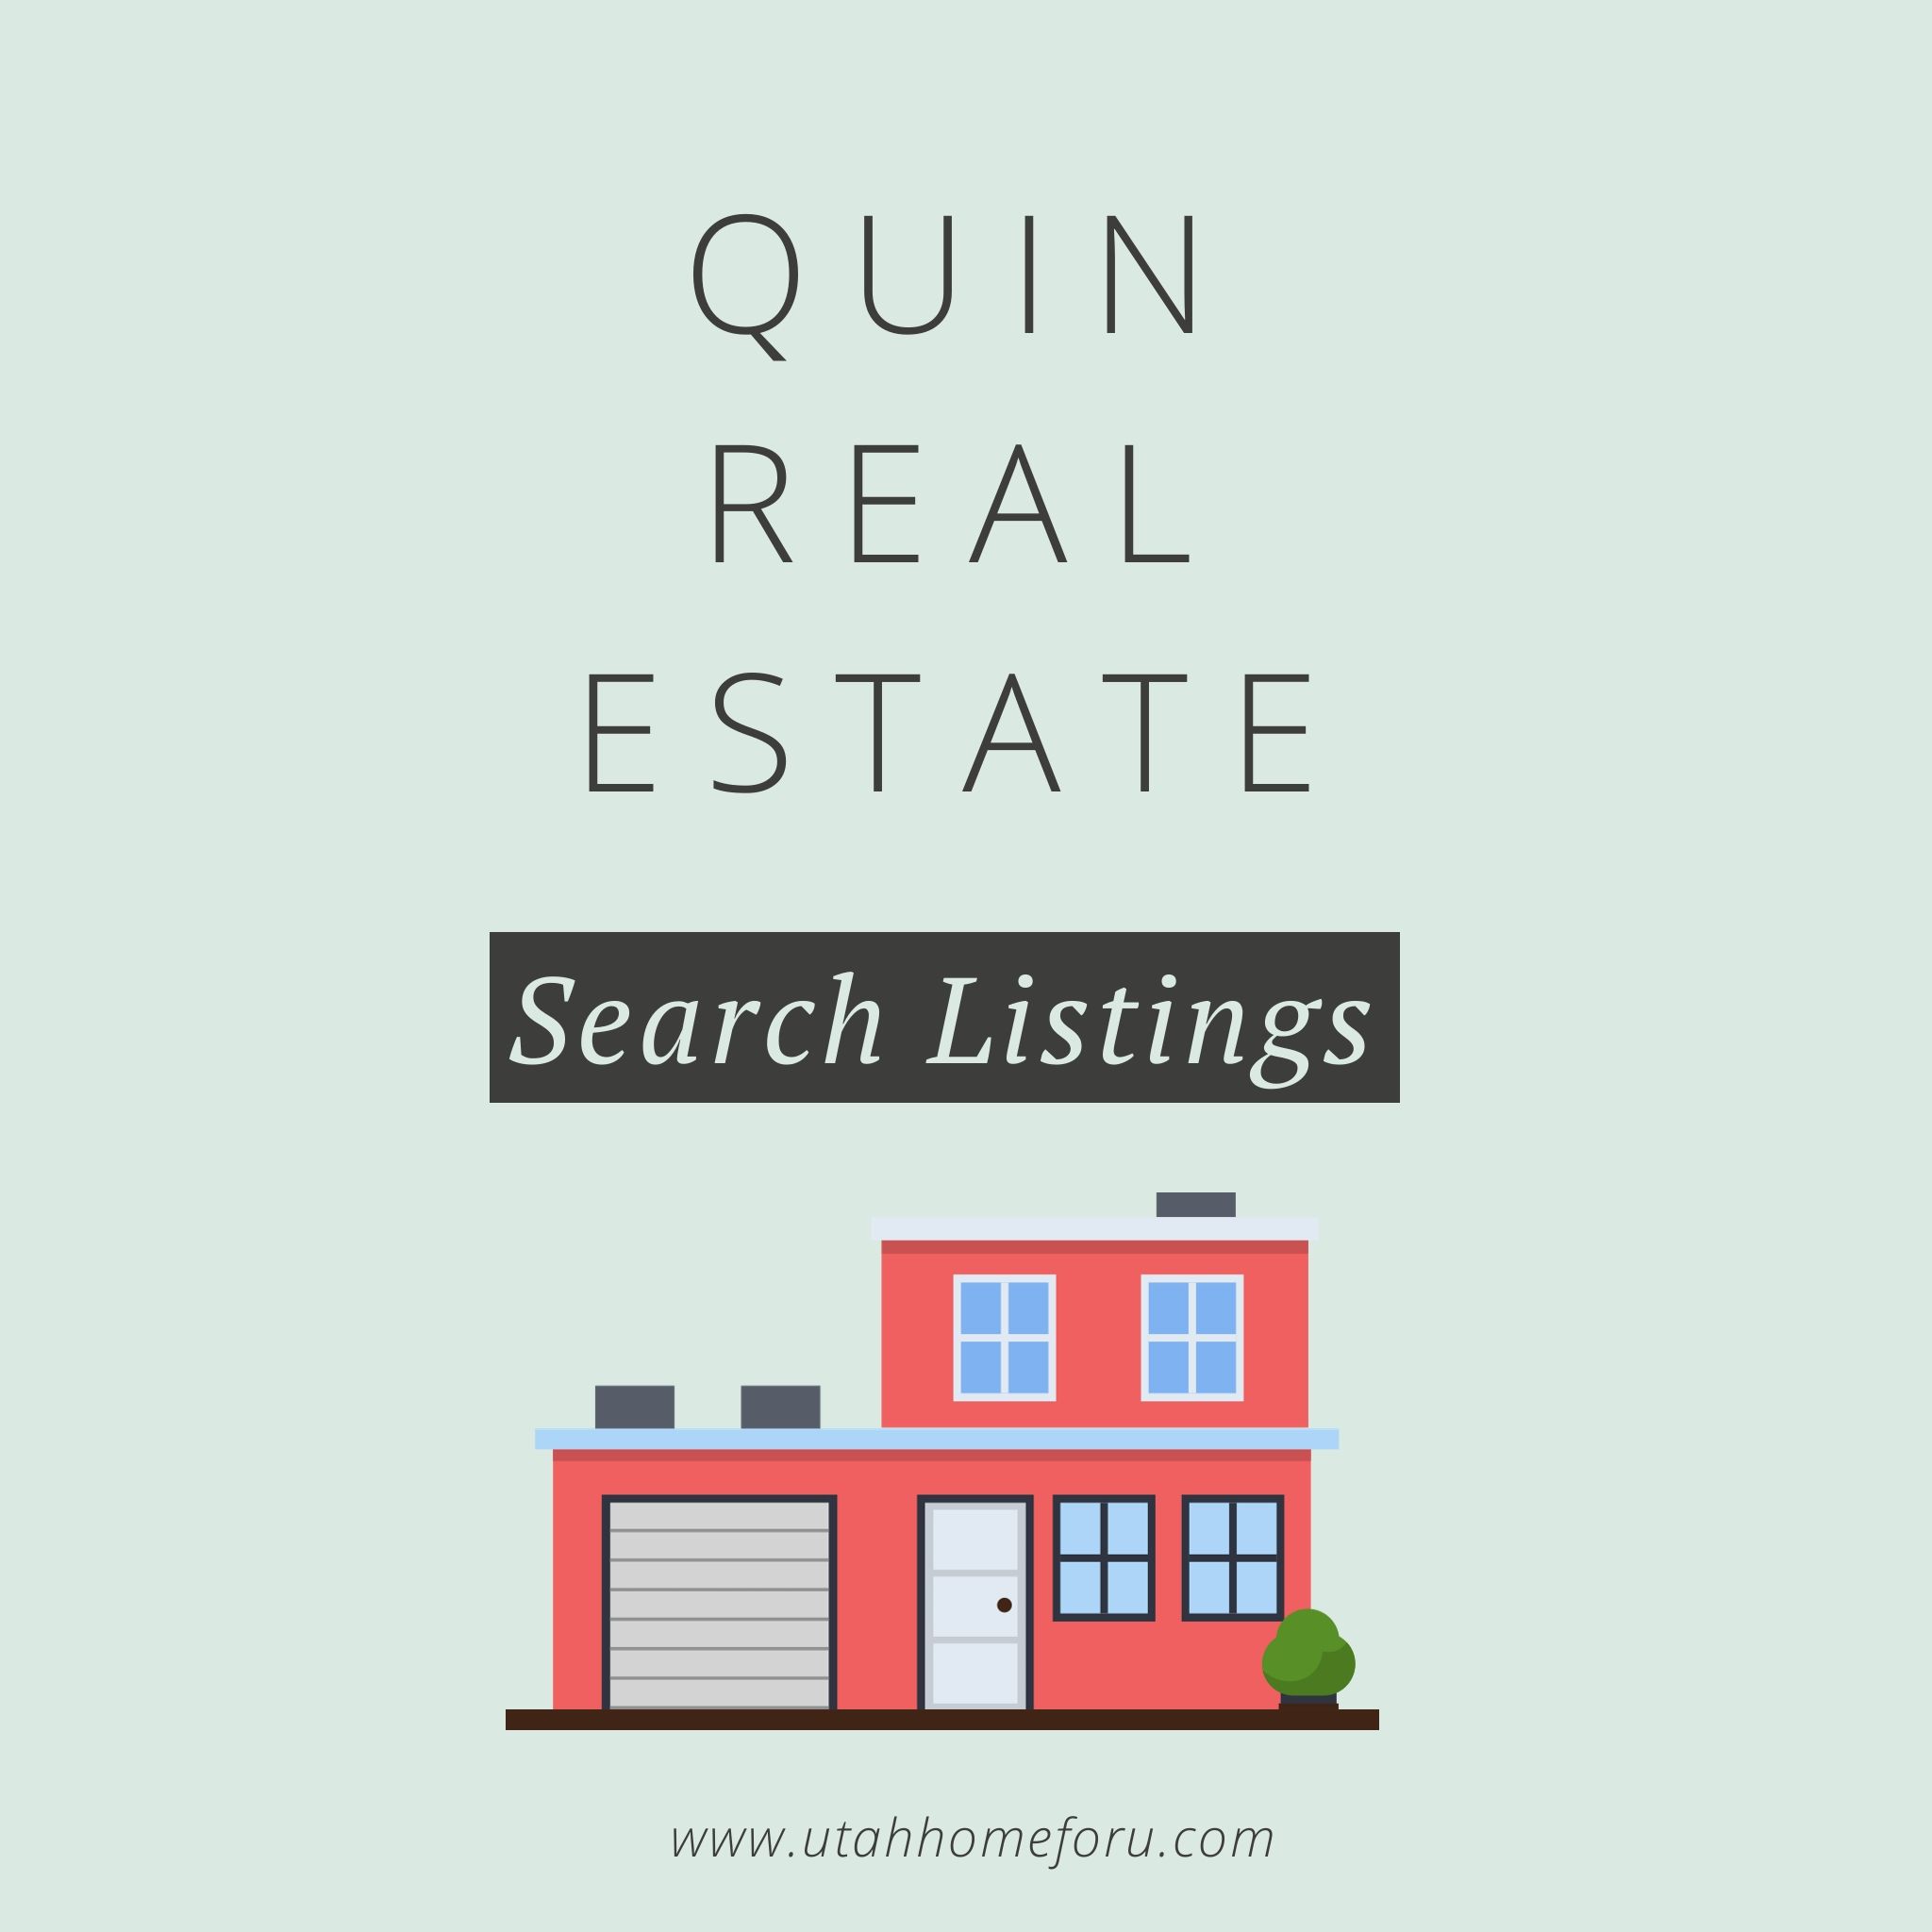 Real estate agency, Home for sale list & sell